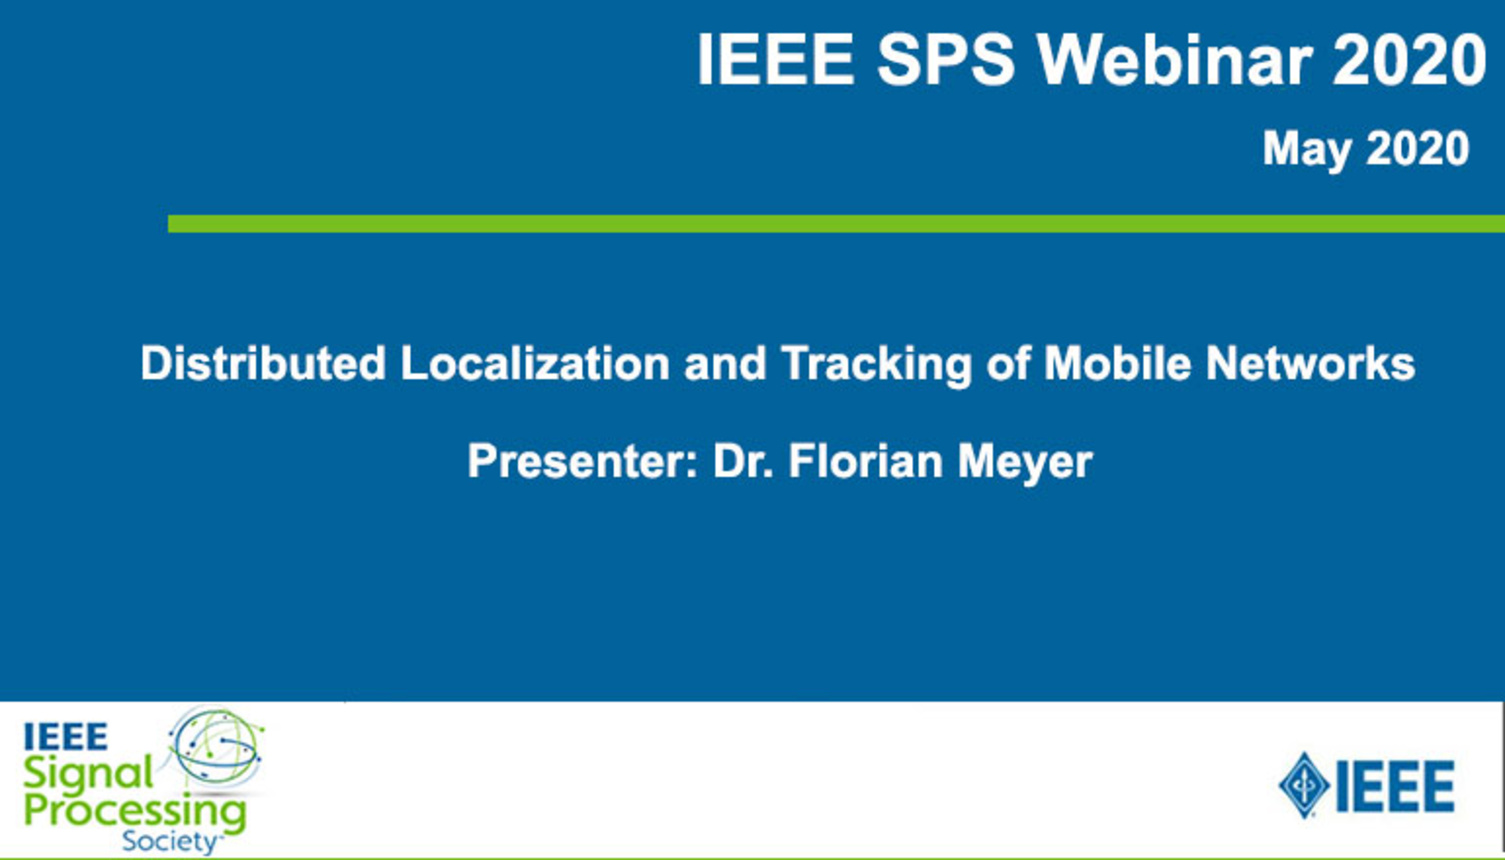 Distributed Localization and Tracking of Mobile Networks